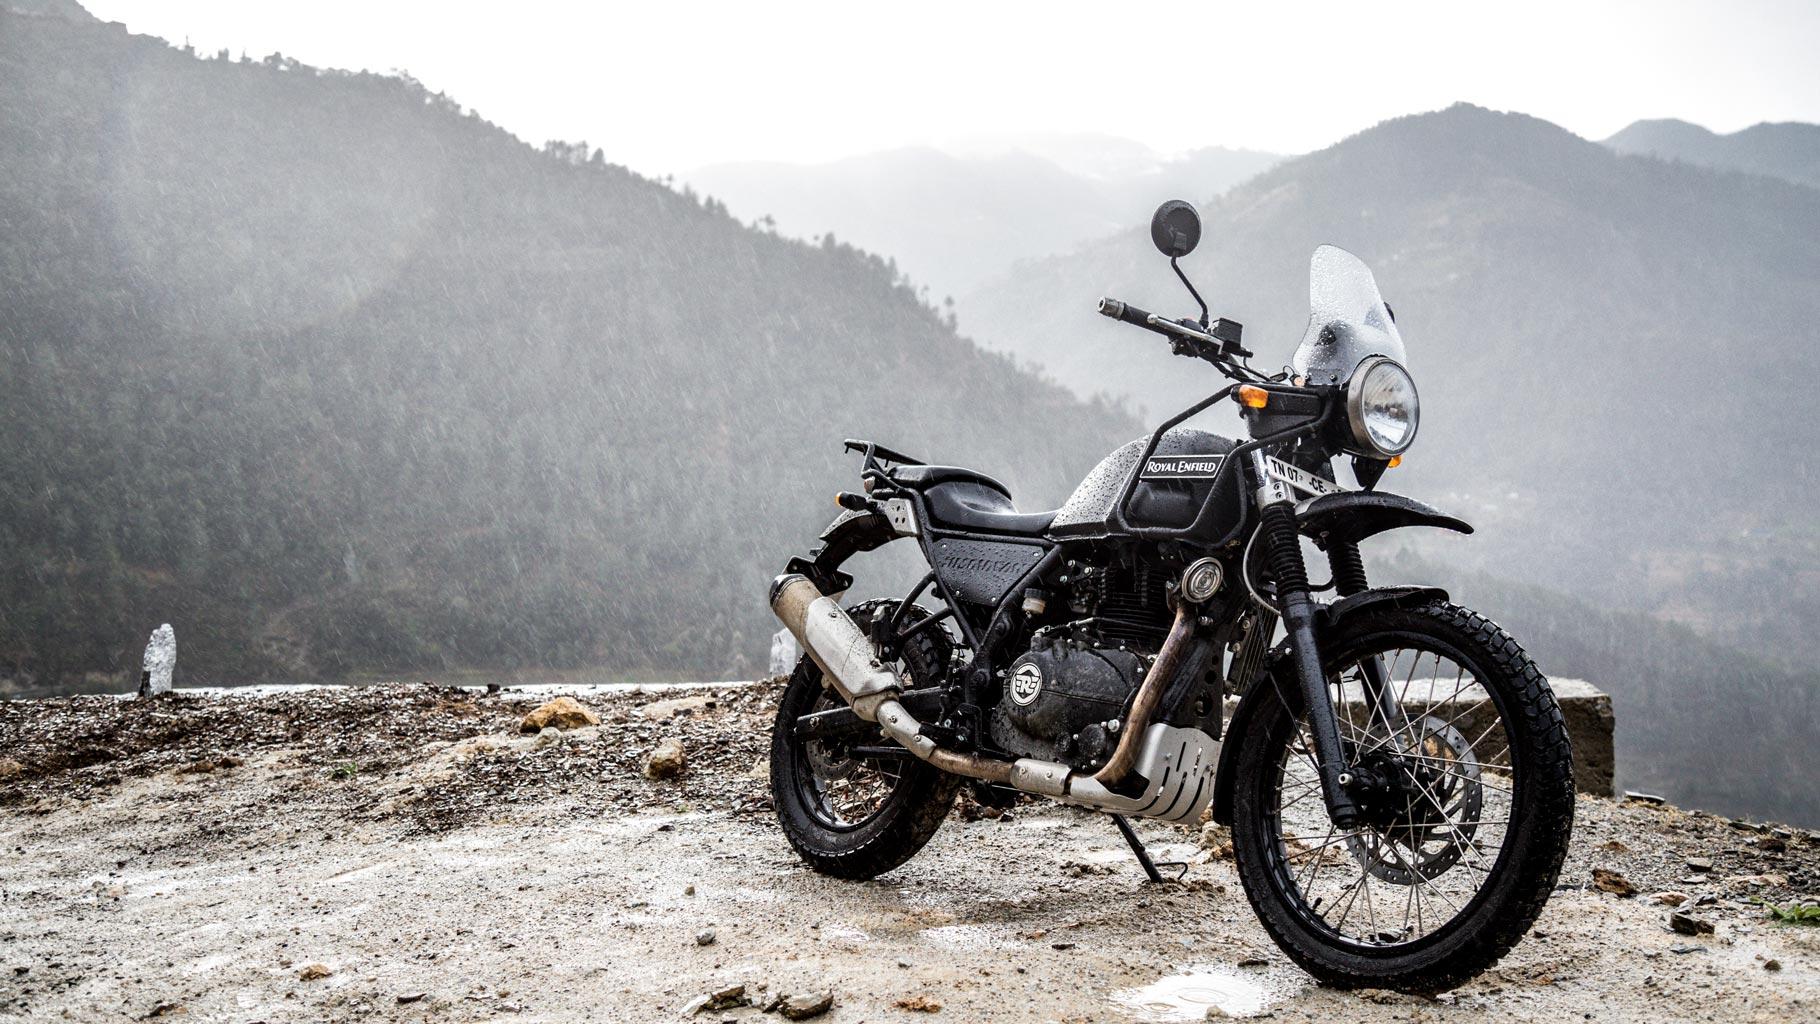 New Royal Enfield Himalayan BS-IV review: One bike many avatars - Times of  India